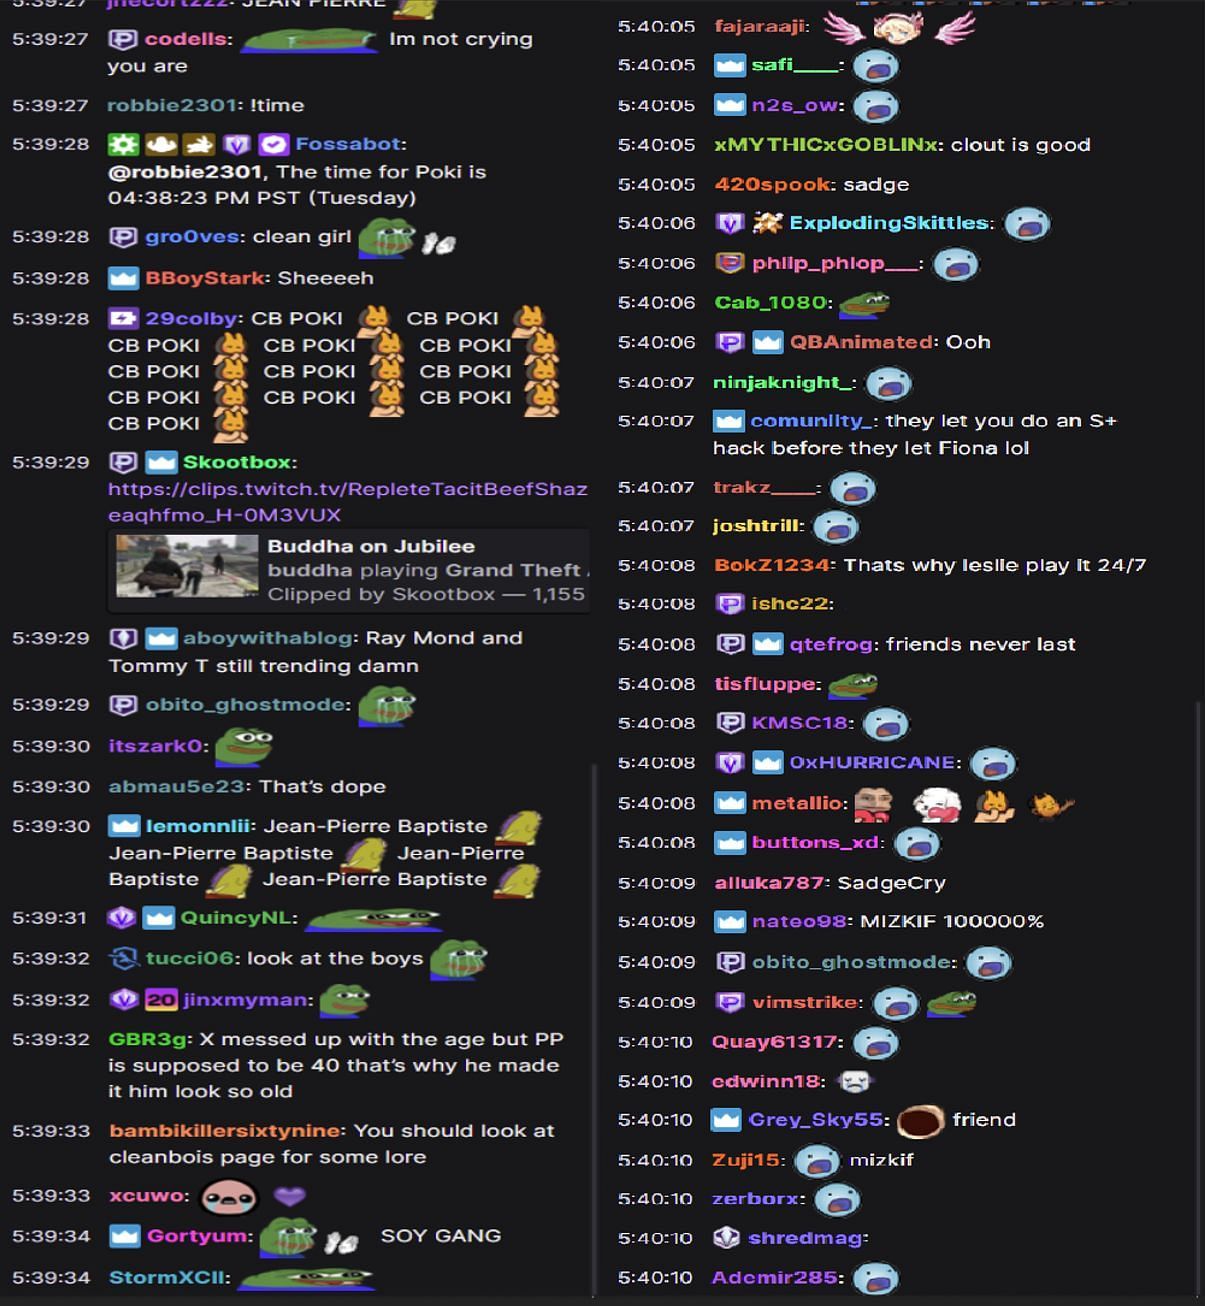 Fans in the streamer&#039;s chat reacting to her friends&#039; actions (images via Pokimanelol/Twitch chat)